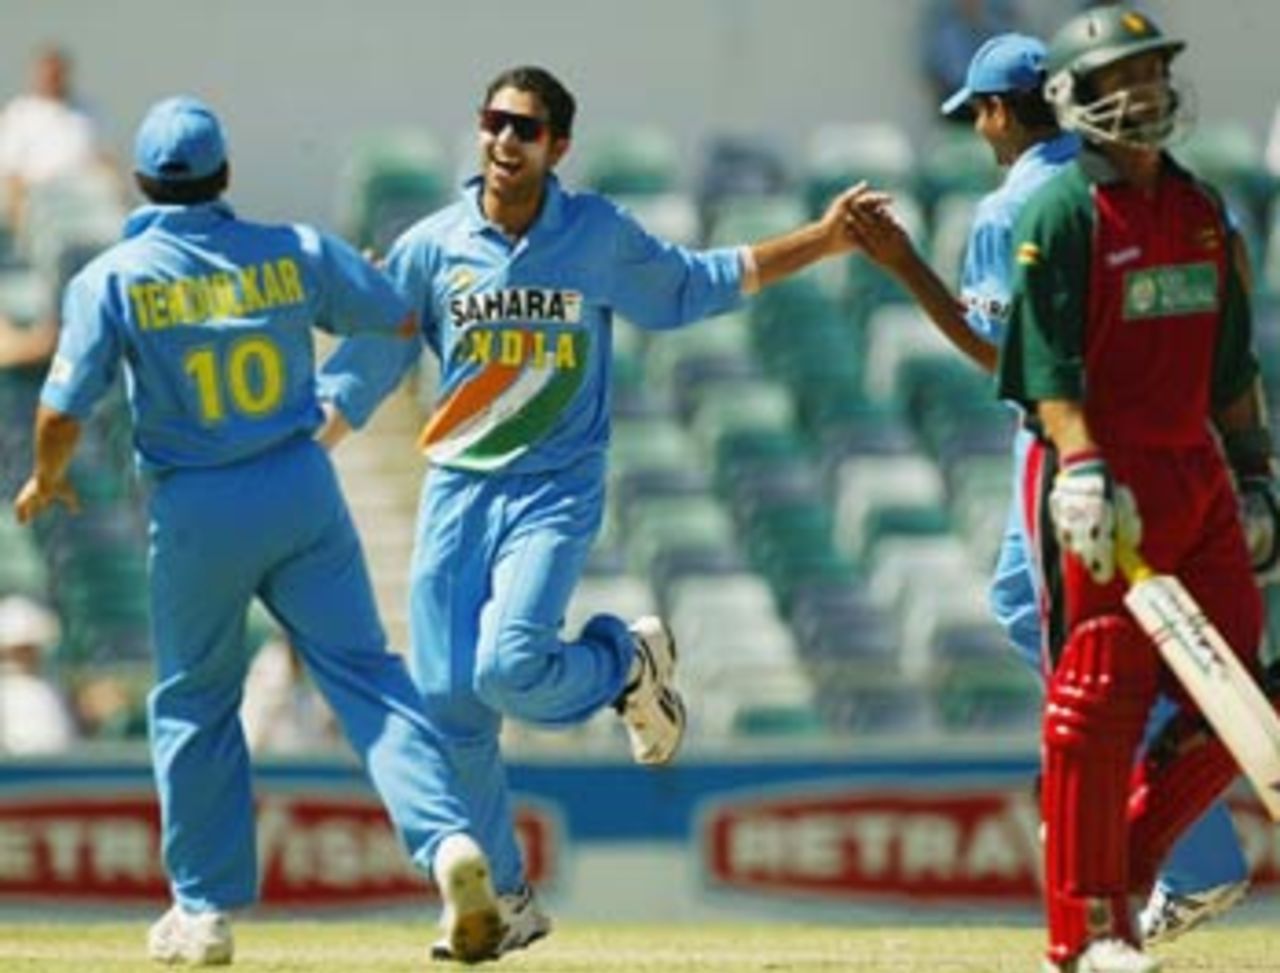 The Indians were sharp on the field, Yuvraj Singh pulled off a run out with a direct hit, India v Zimbabwe, 12th ODI, VB Series, Perth, February 3rd, 2004